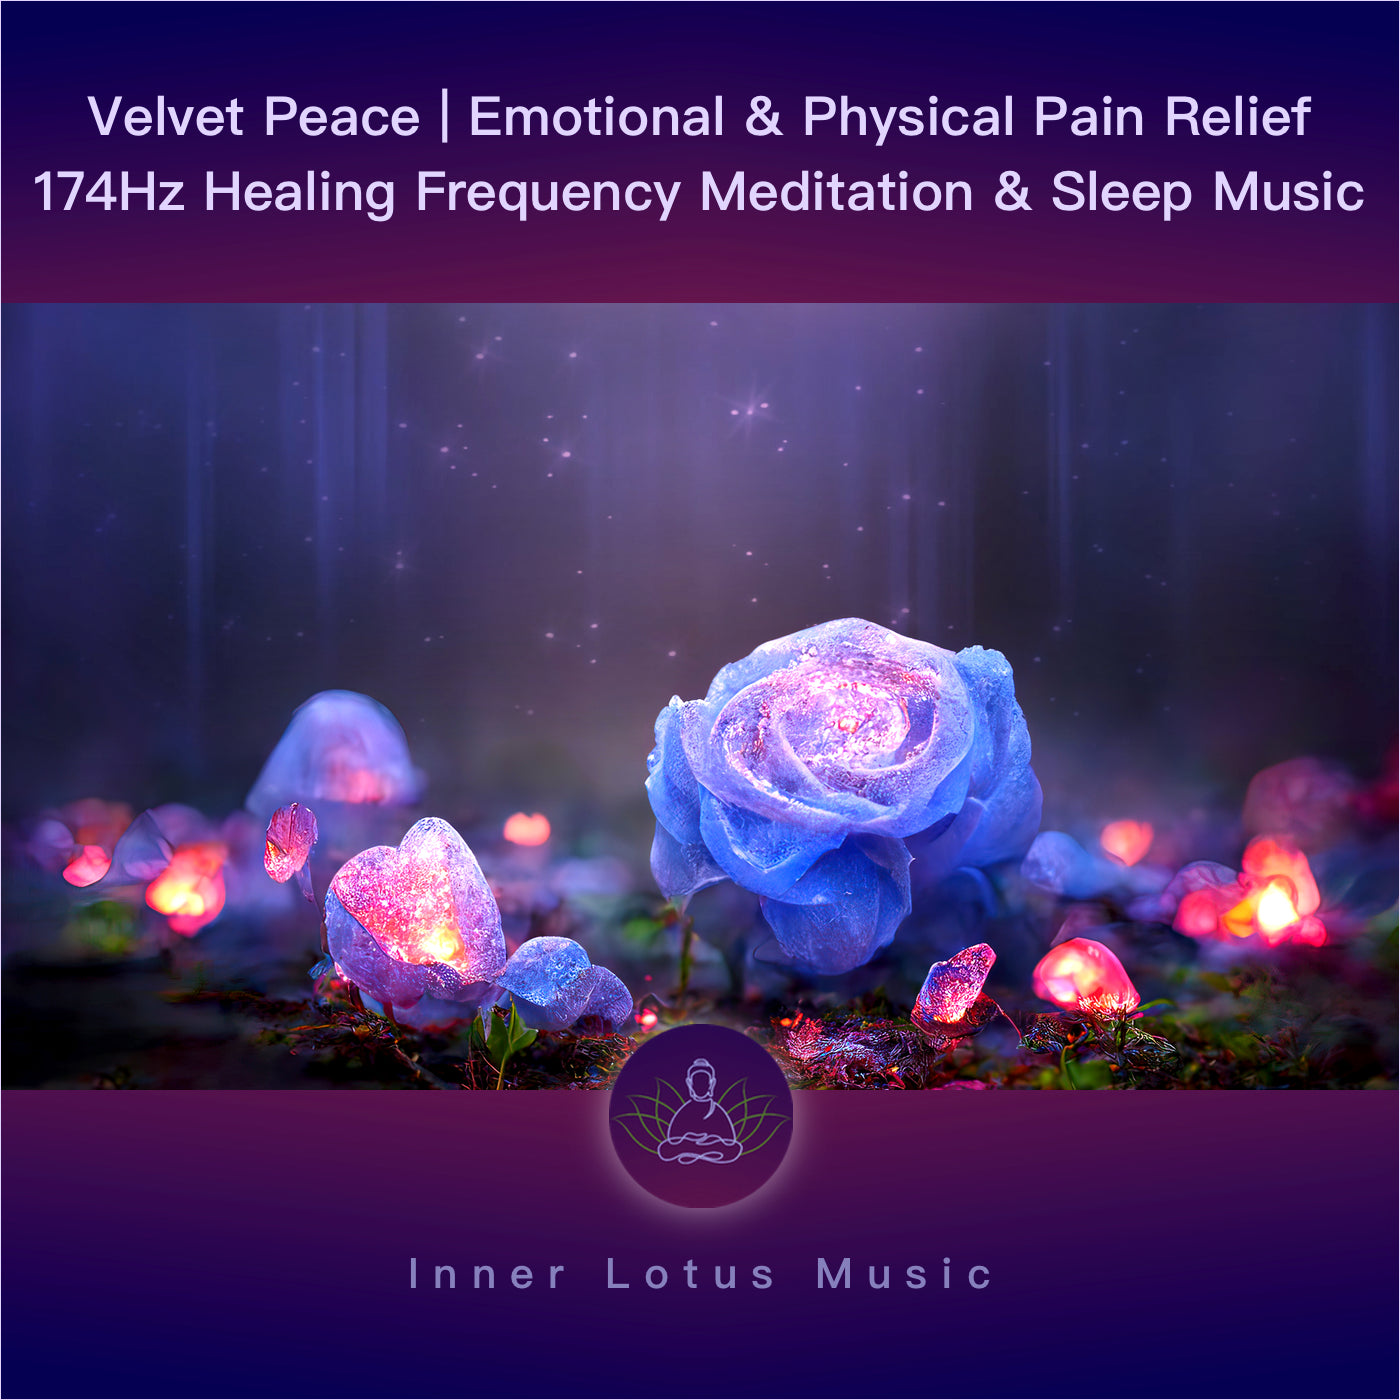 Velvet Peace | Emotional & Physical Pain Relief | 174Hz Healing Frequency Meditation & Sleep Music